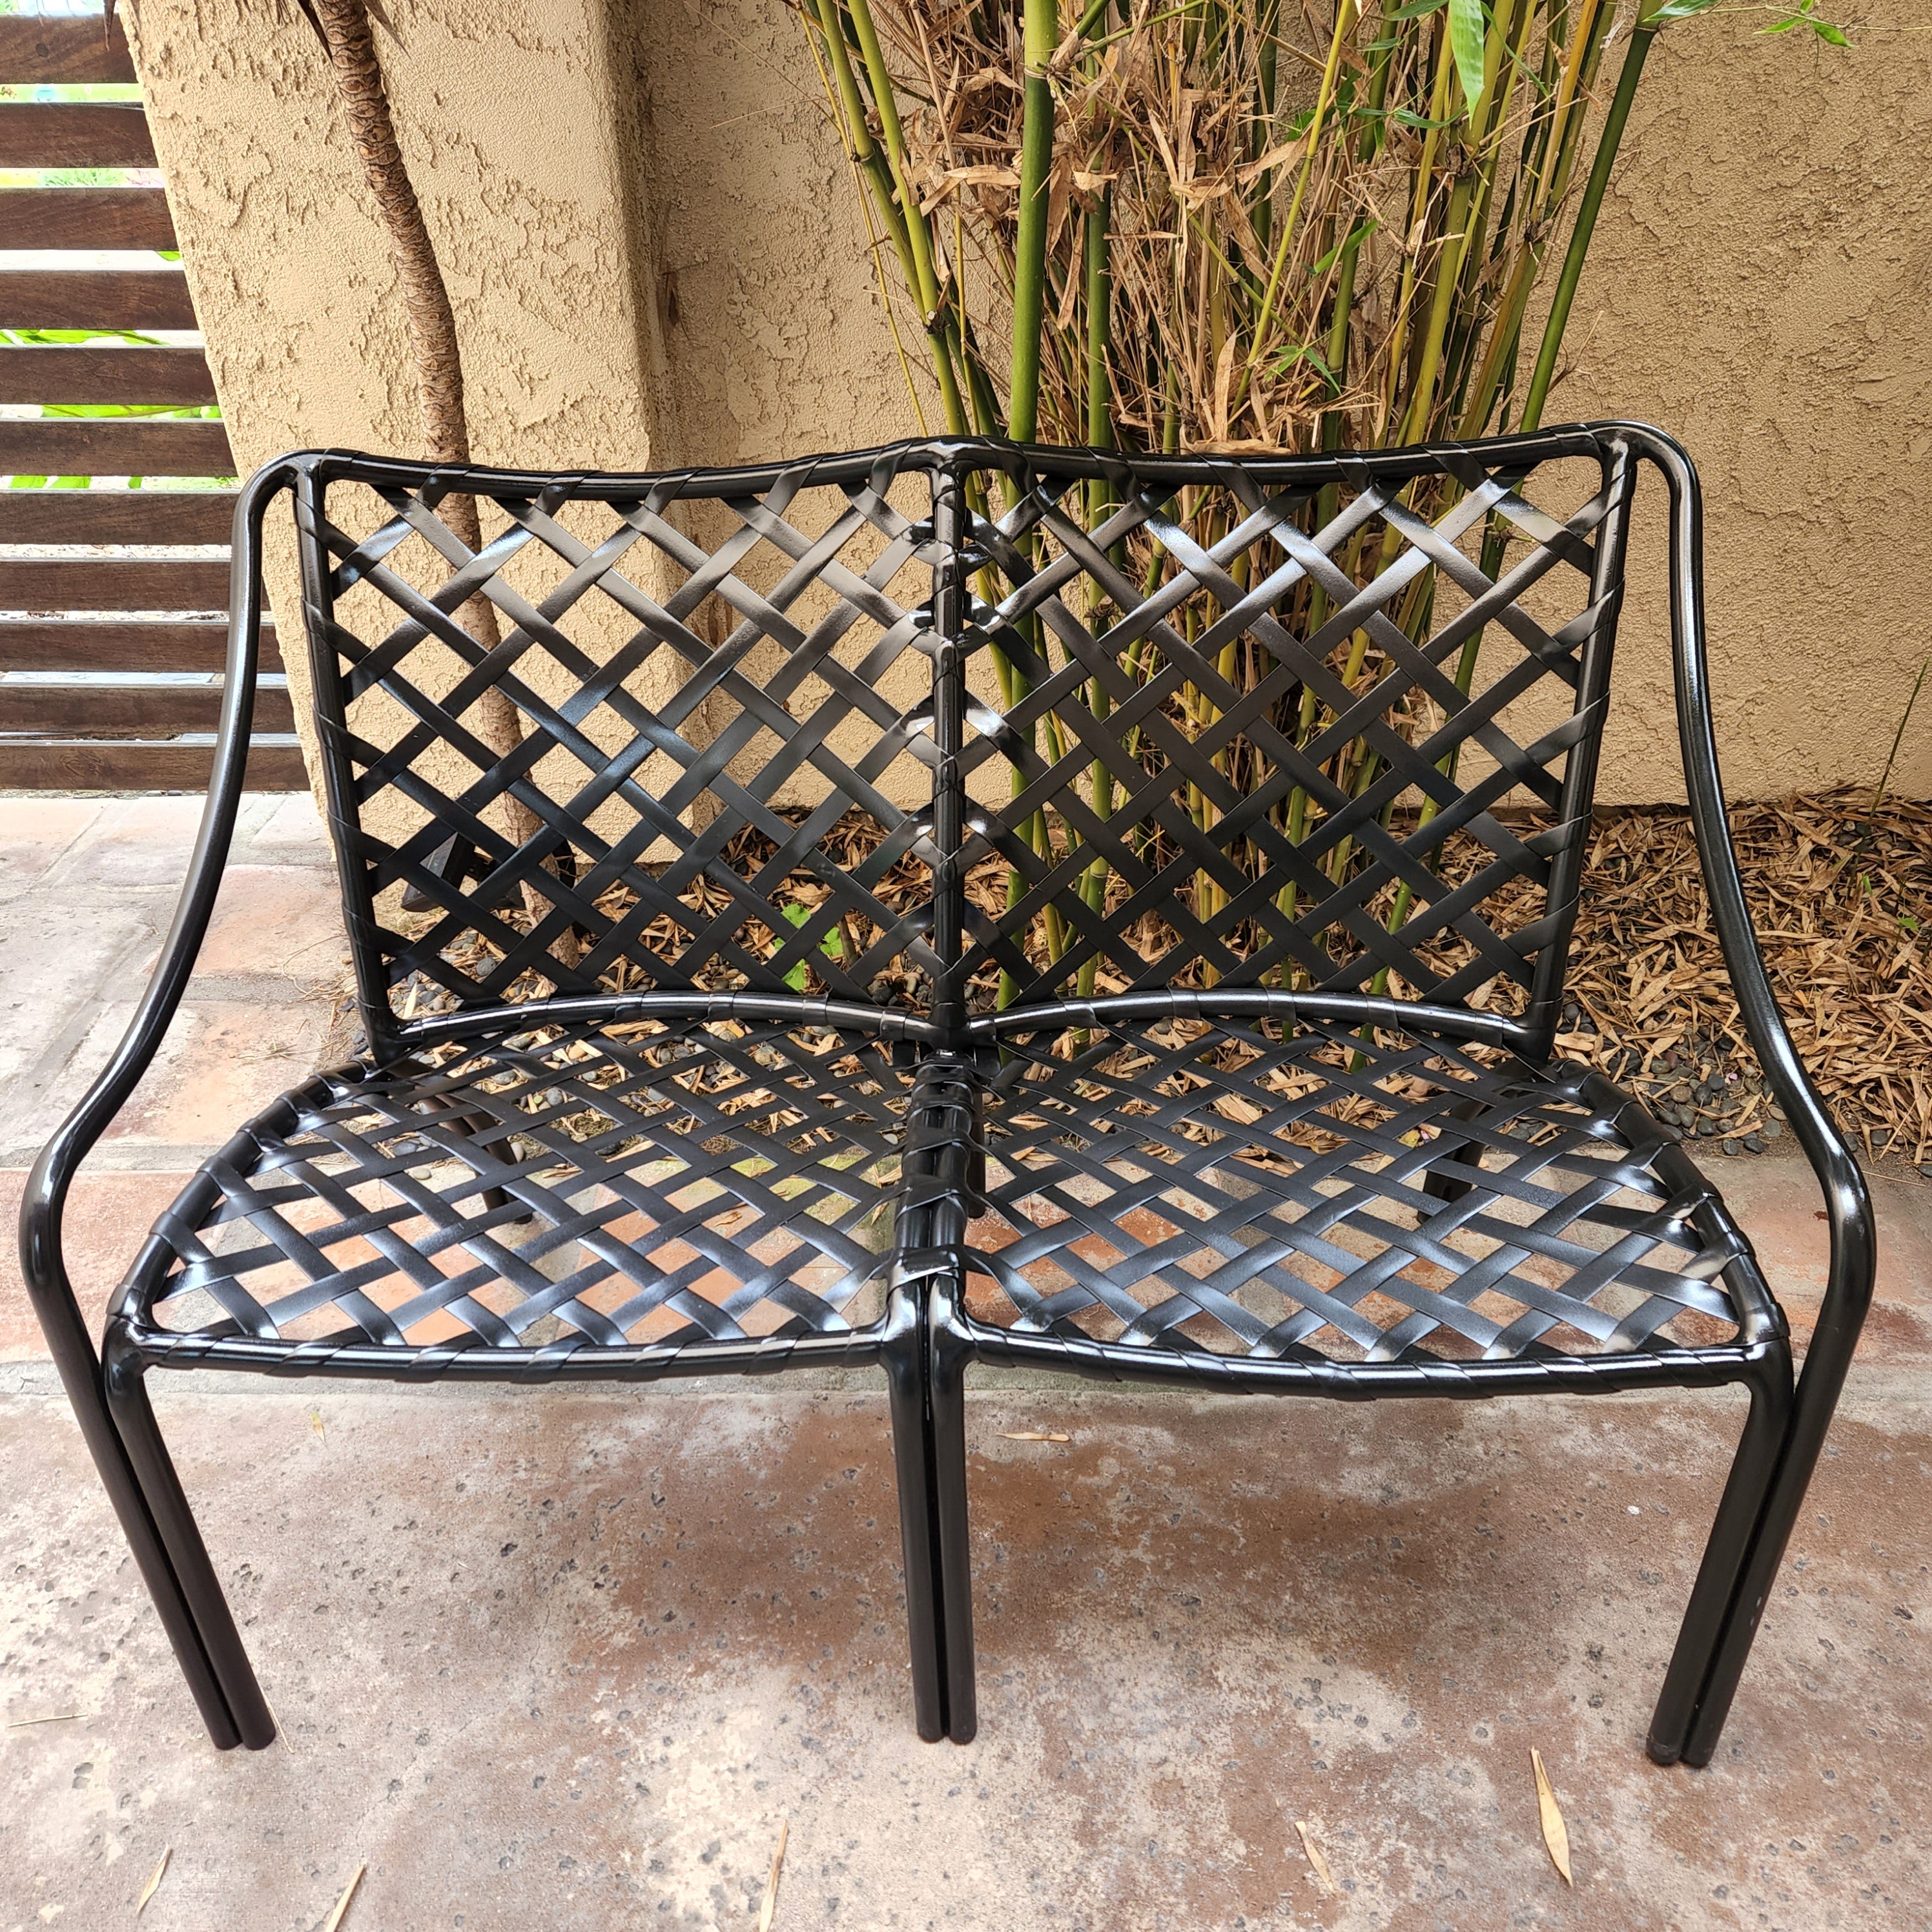 1960s Classic Brown Jordan Patio settee love seat Tamiami in Black
43 w x 31.5 tall x 23 d Seat H 15
Preowned vintage unrestored condition. 
Settee painted black prior to acquisition. Straps are firmly intact. 
Fading and scuffs present. 
Vintage